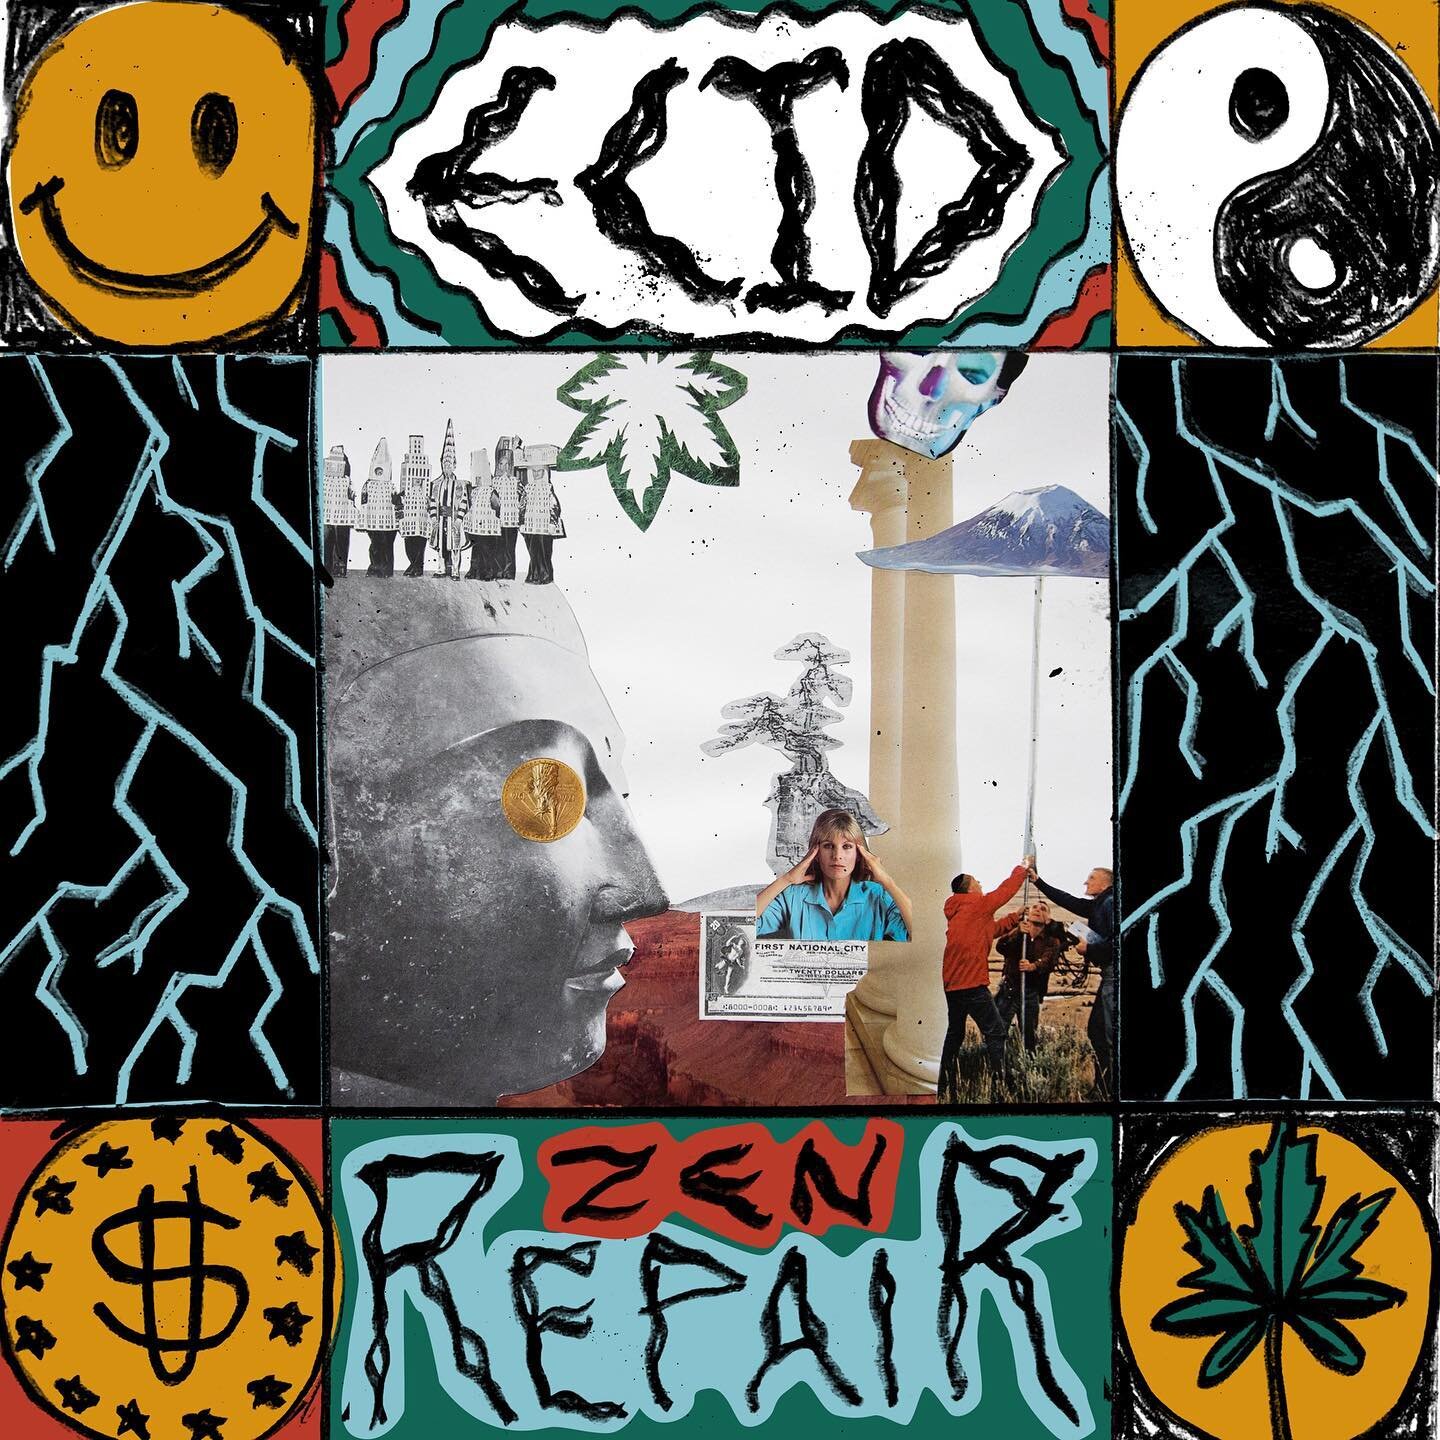 Just came across these early drafts of the Zen Repair cover art by @andymcalpinedesign !

It all started with a series of collage&rsquo;s my homie @derekweisberg put together in late 2019 (in the before times)&hellip;.At the time I had a chunk of tra